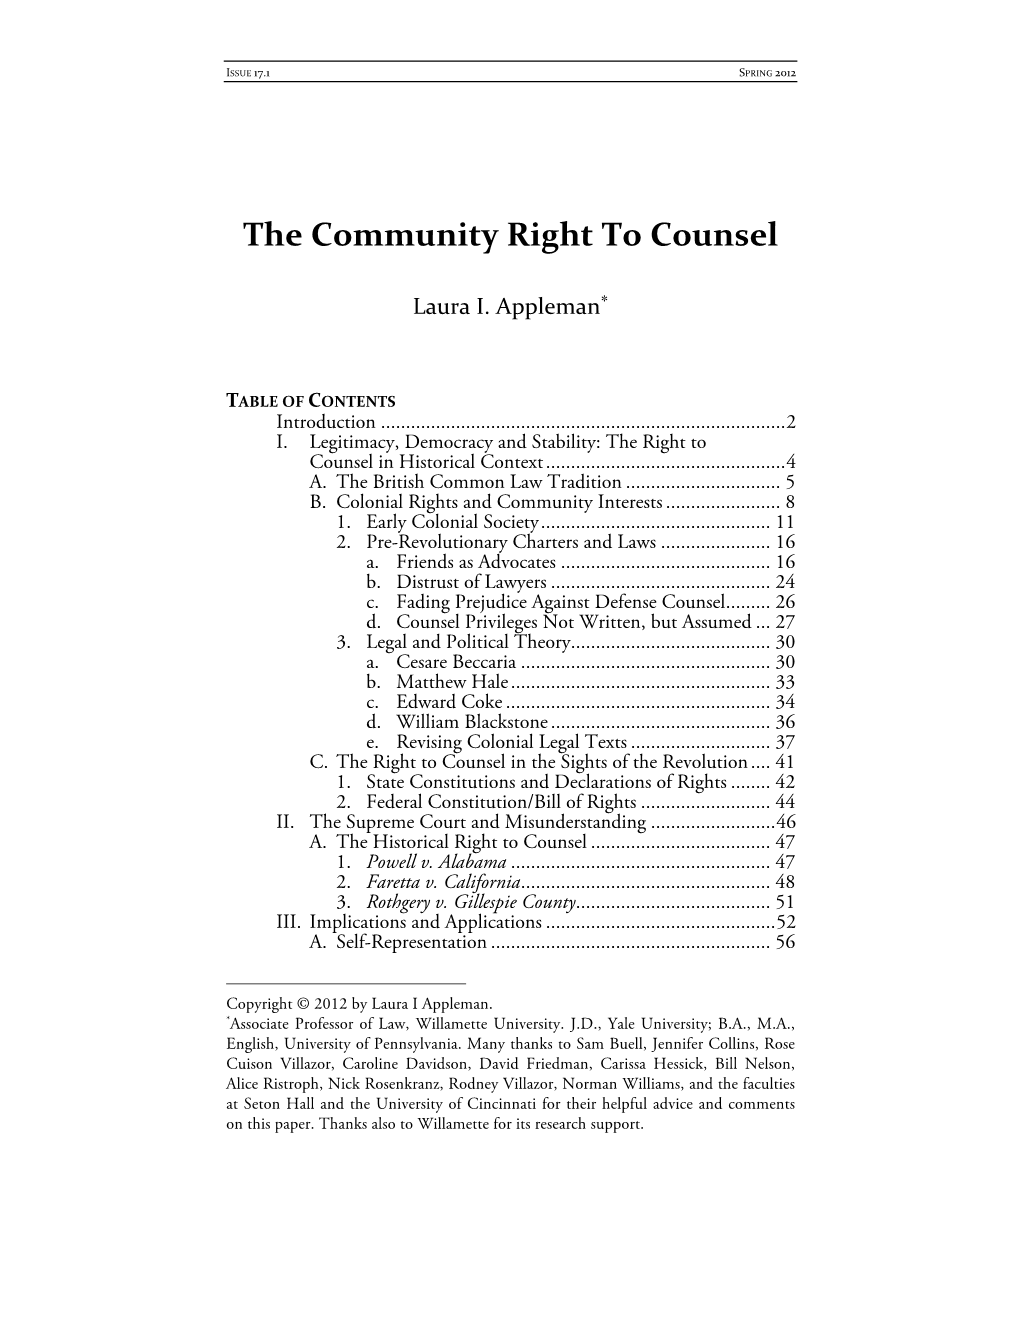 The Community Right to Counsel